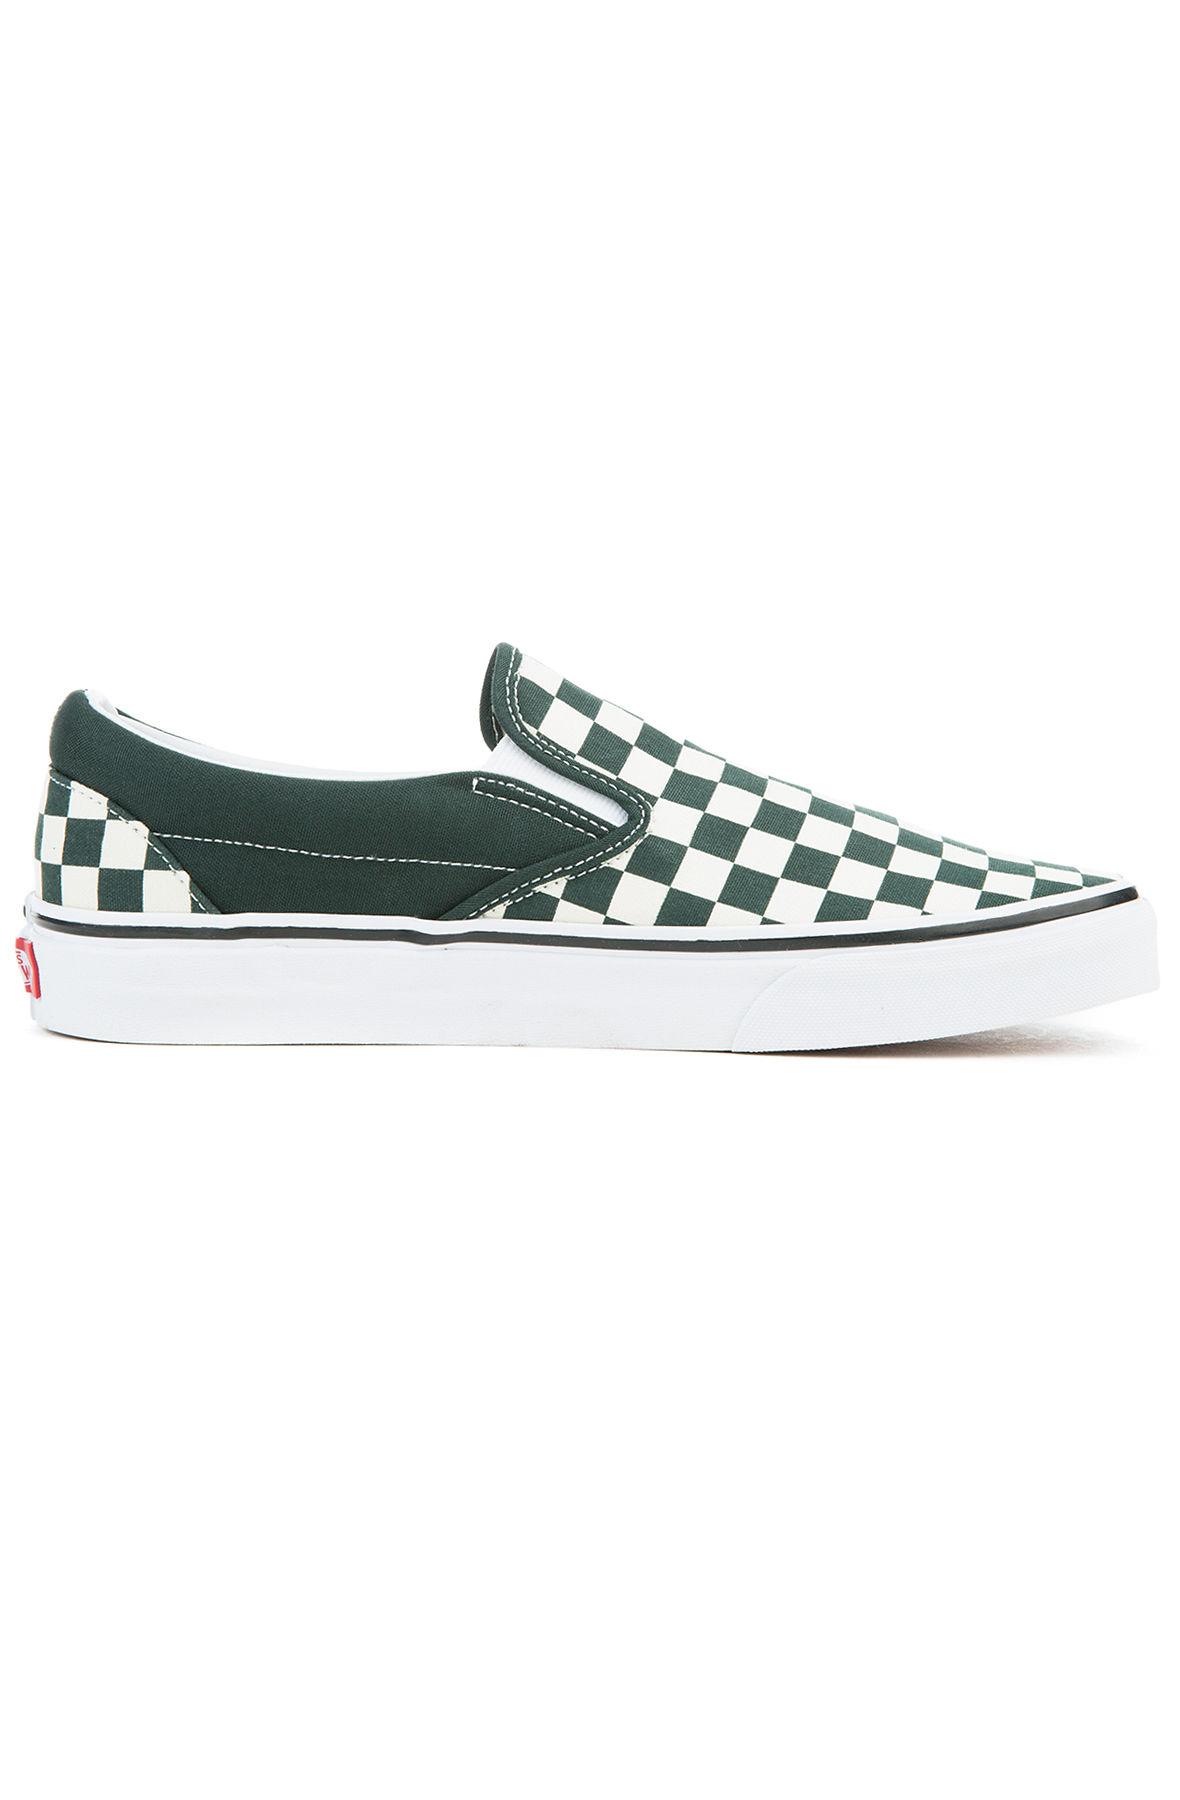 green and white checkerboard slip on vans